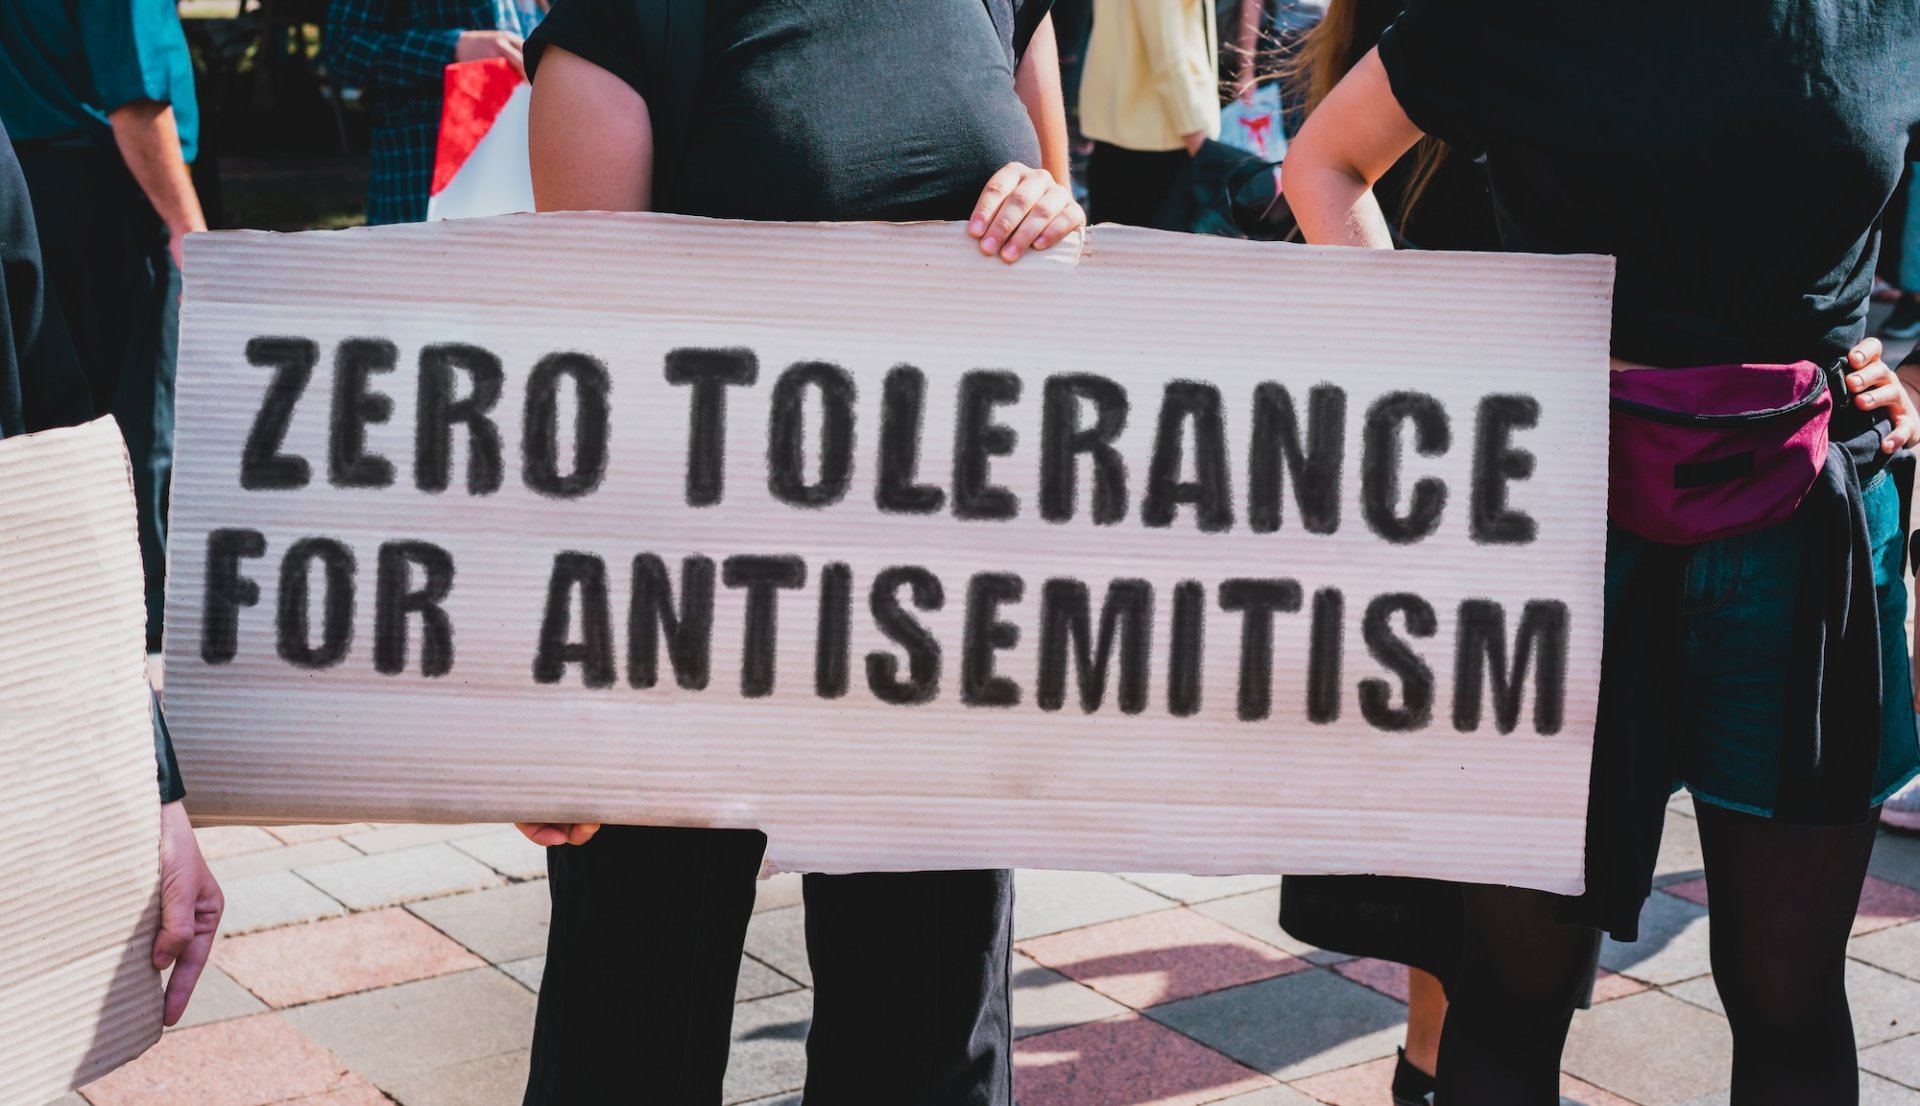 White House Introduces Plan to Combat Antisemitism on College Campuses